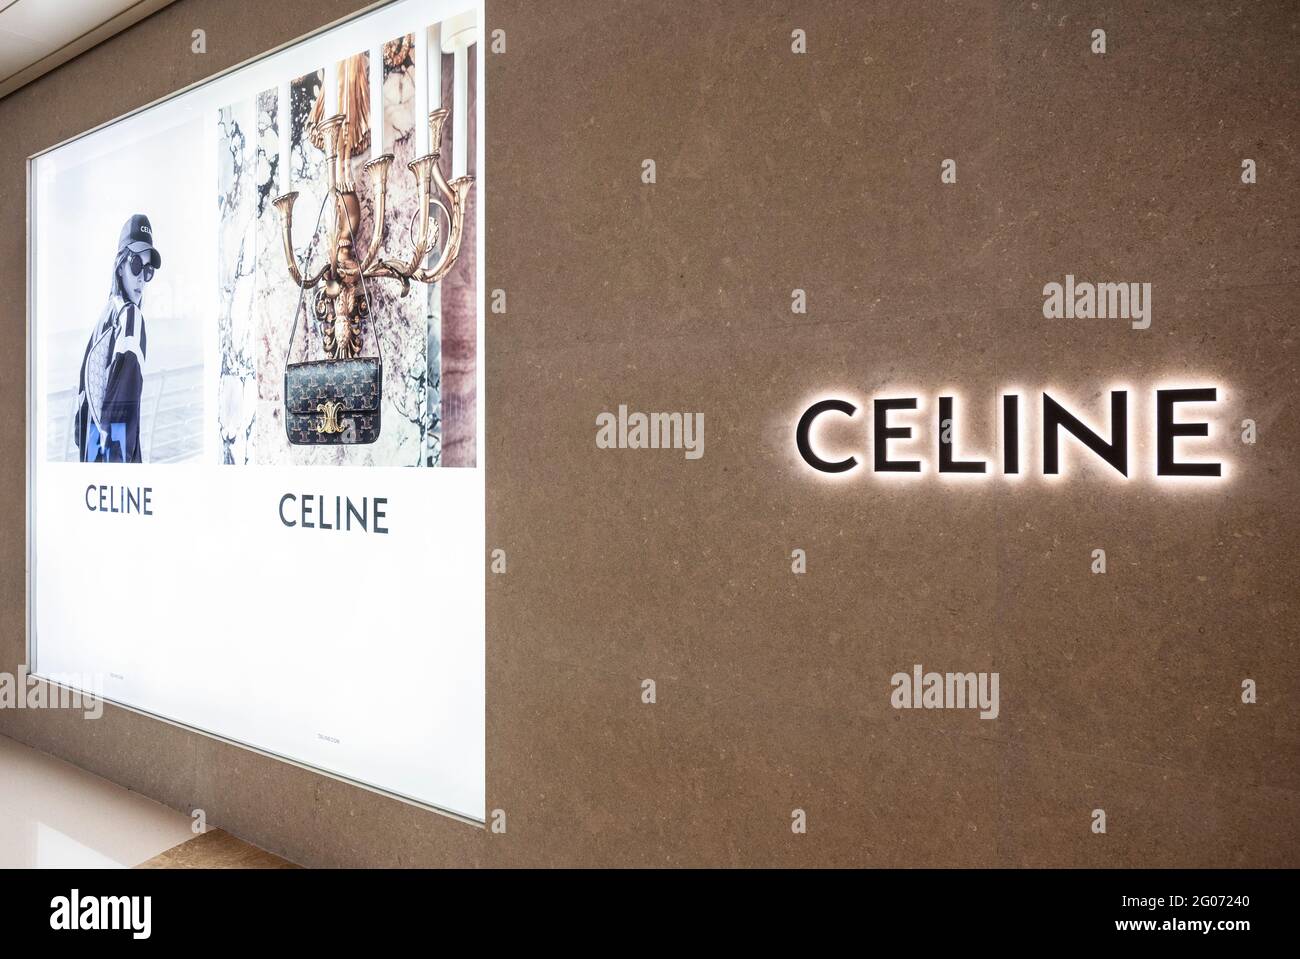 Céline's controversial new logo gets rid of the accent and pisses off